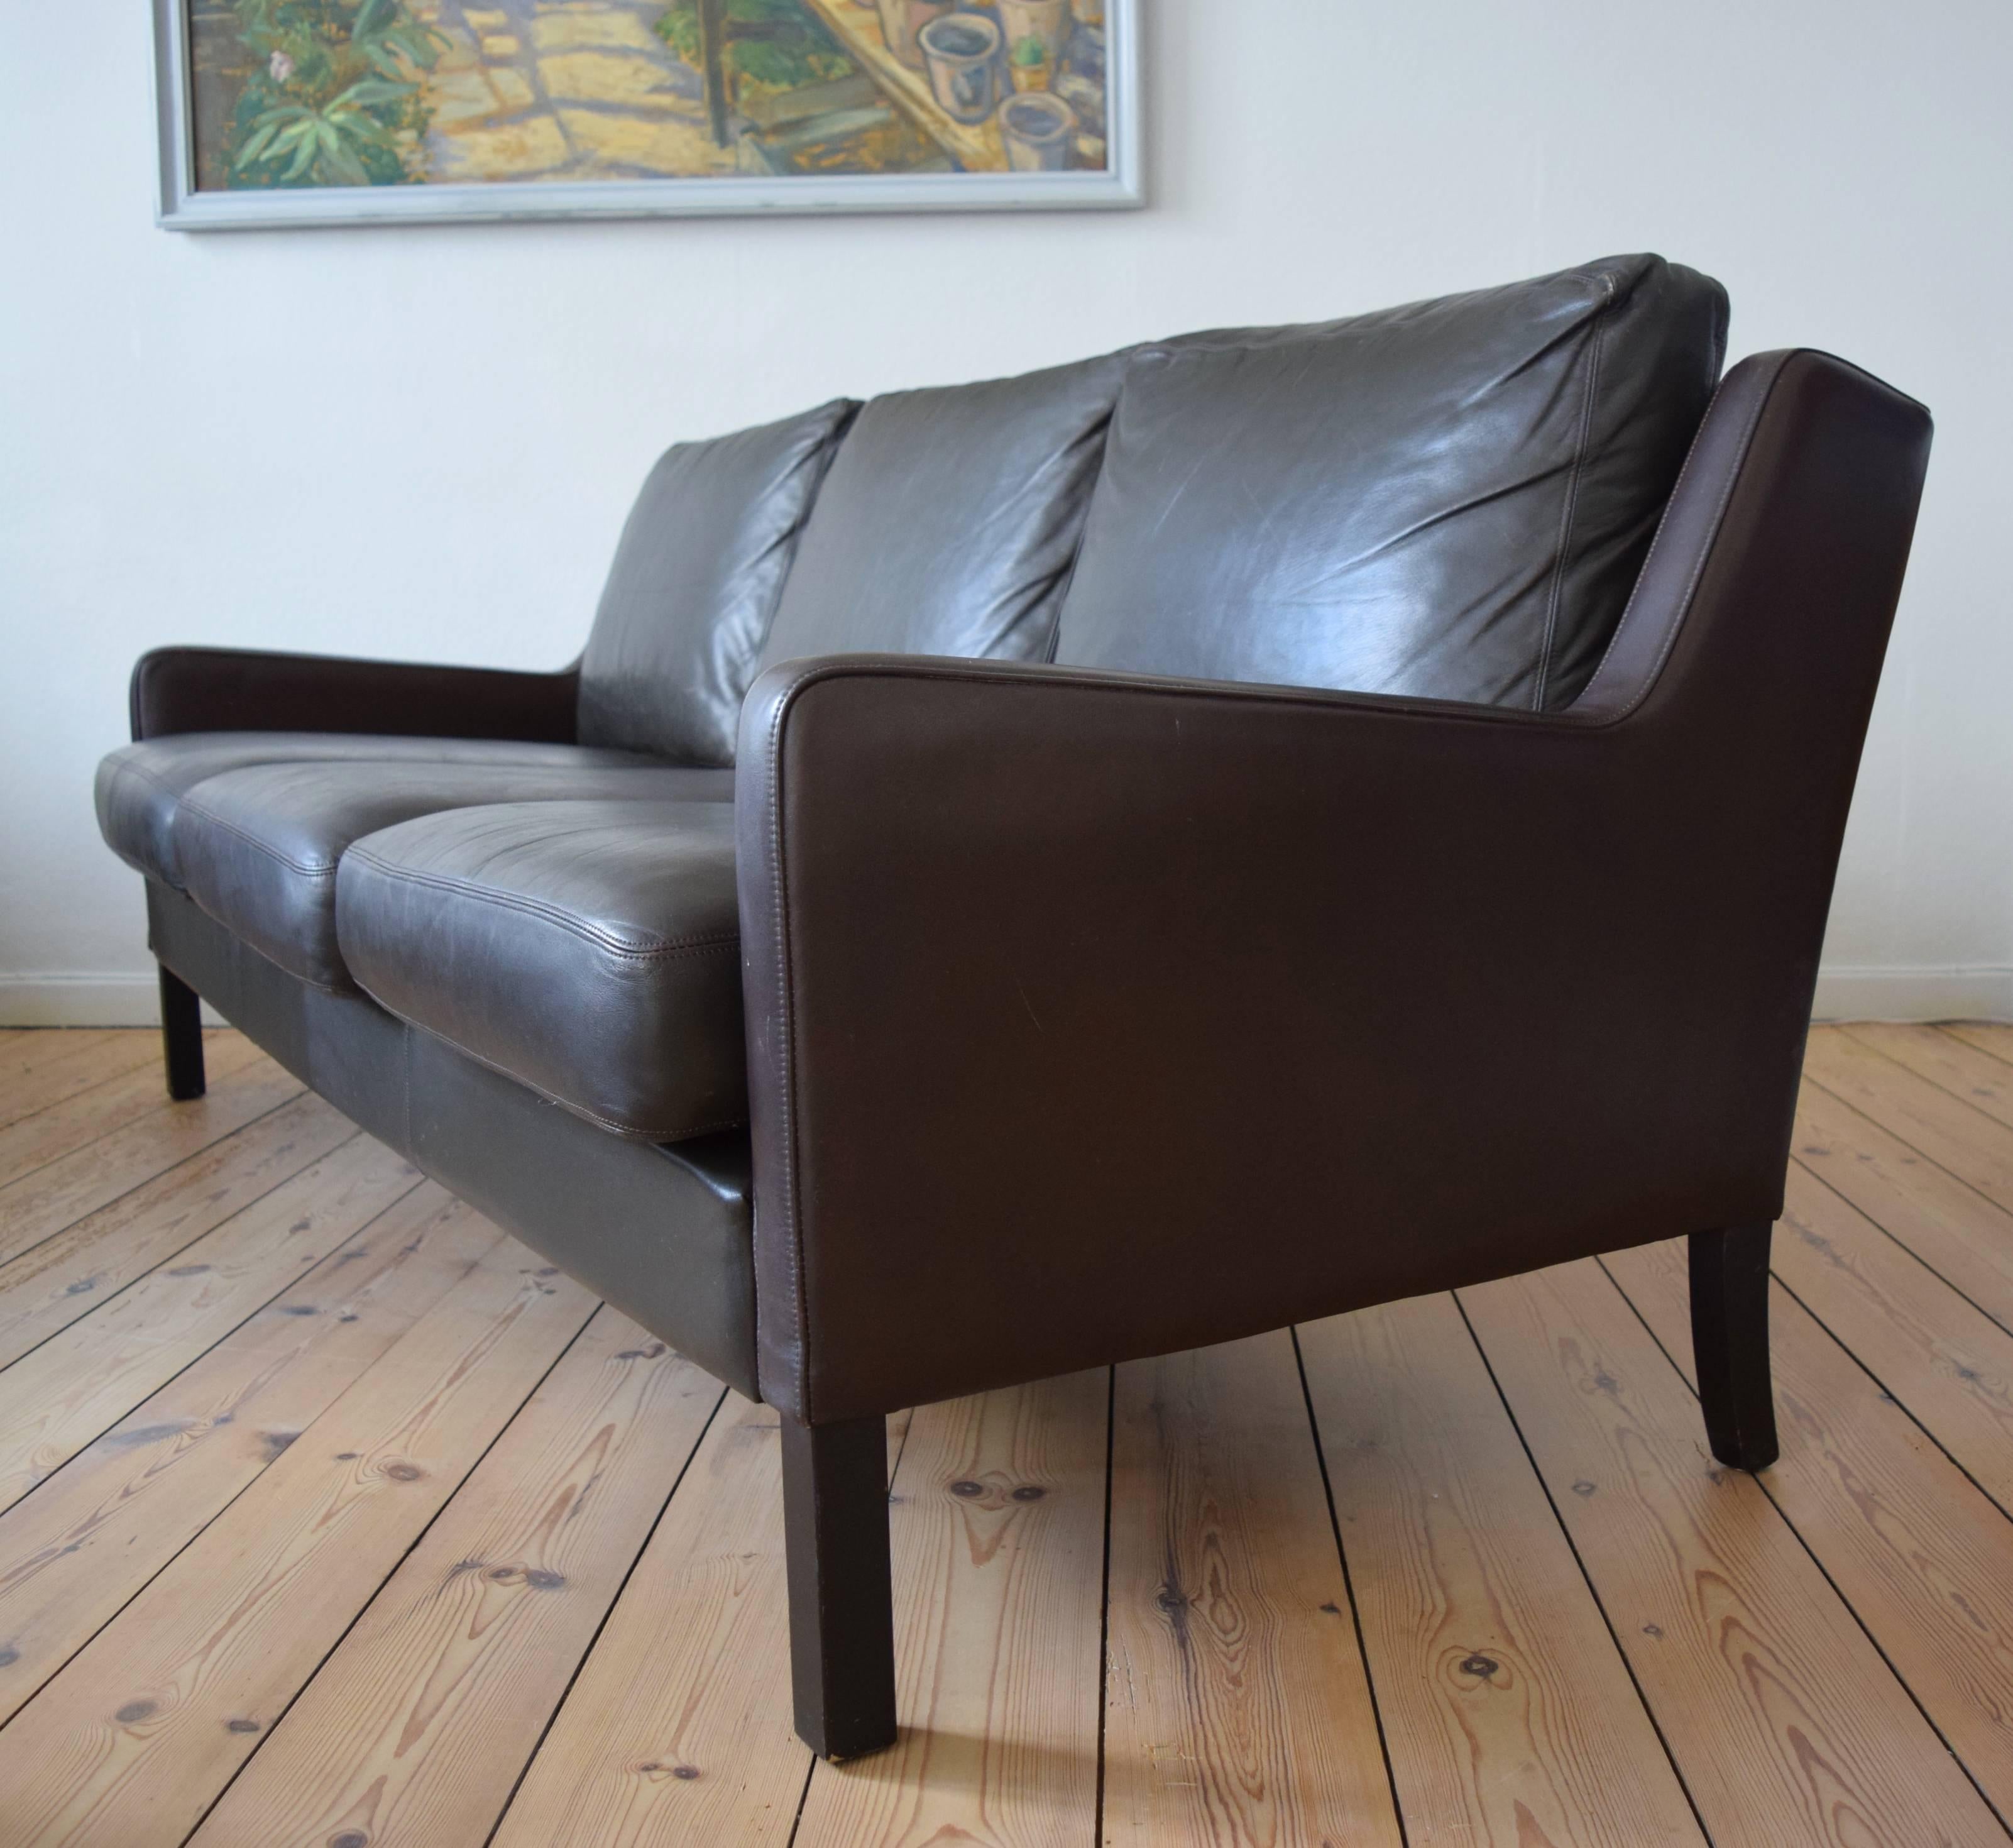 Leather three-person sofa manufactured in Denmark in the 1960s. The low slung design features angular lines and is reminiscent of the 2209 model by Børge Mogensen. The sofa is in very good condition with light wear for its age. The sofa has been